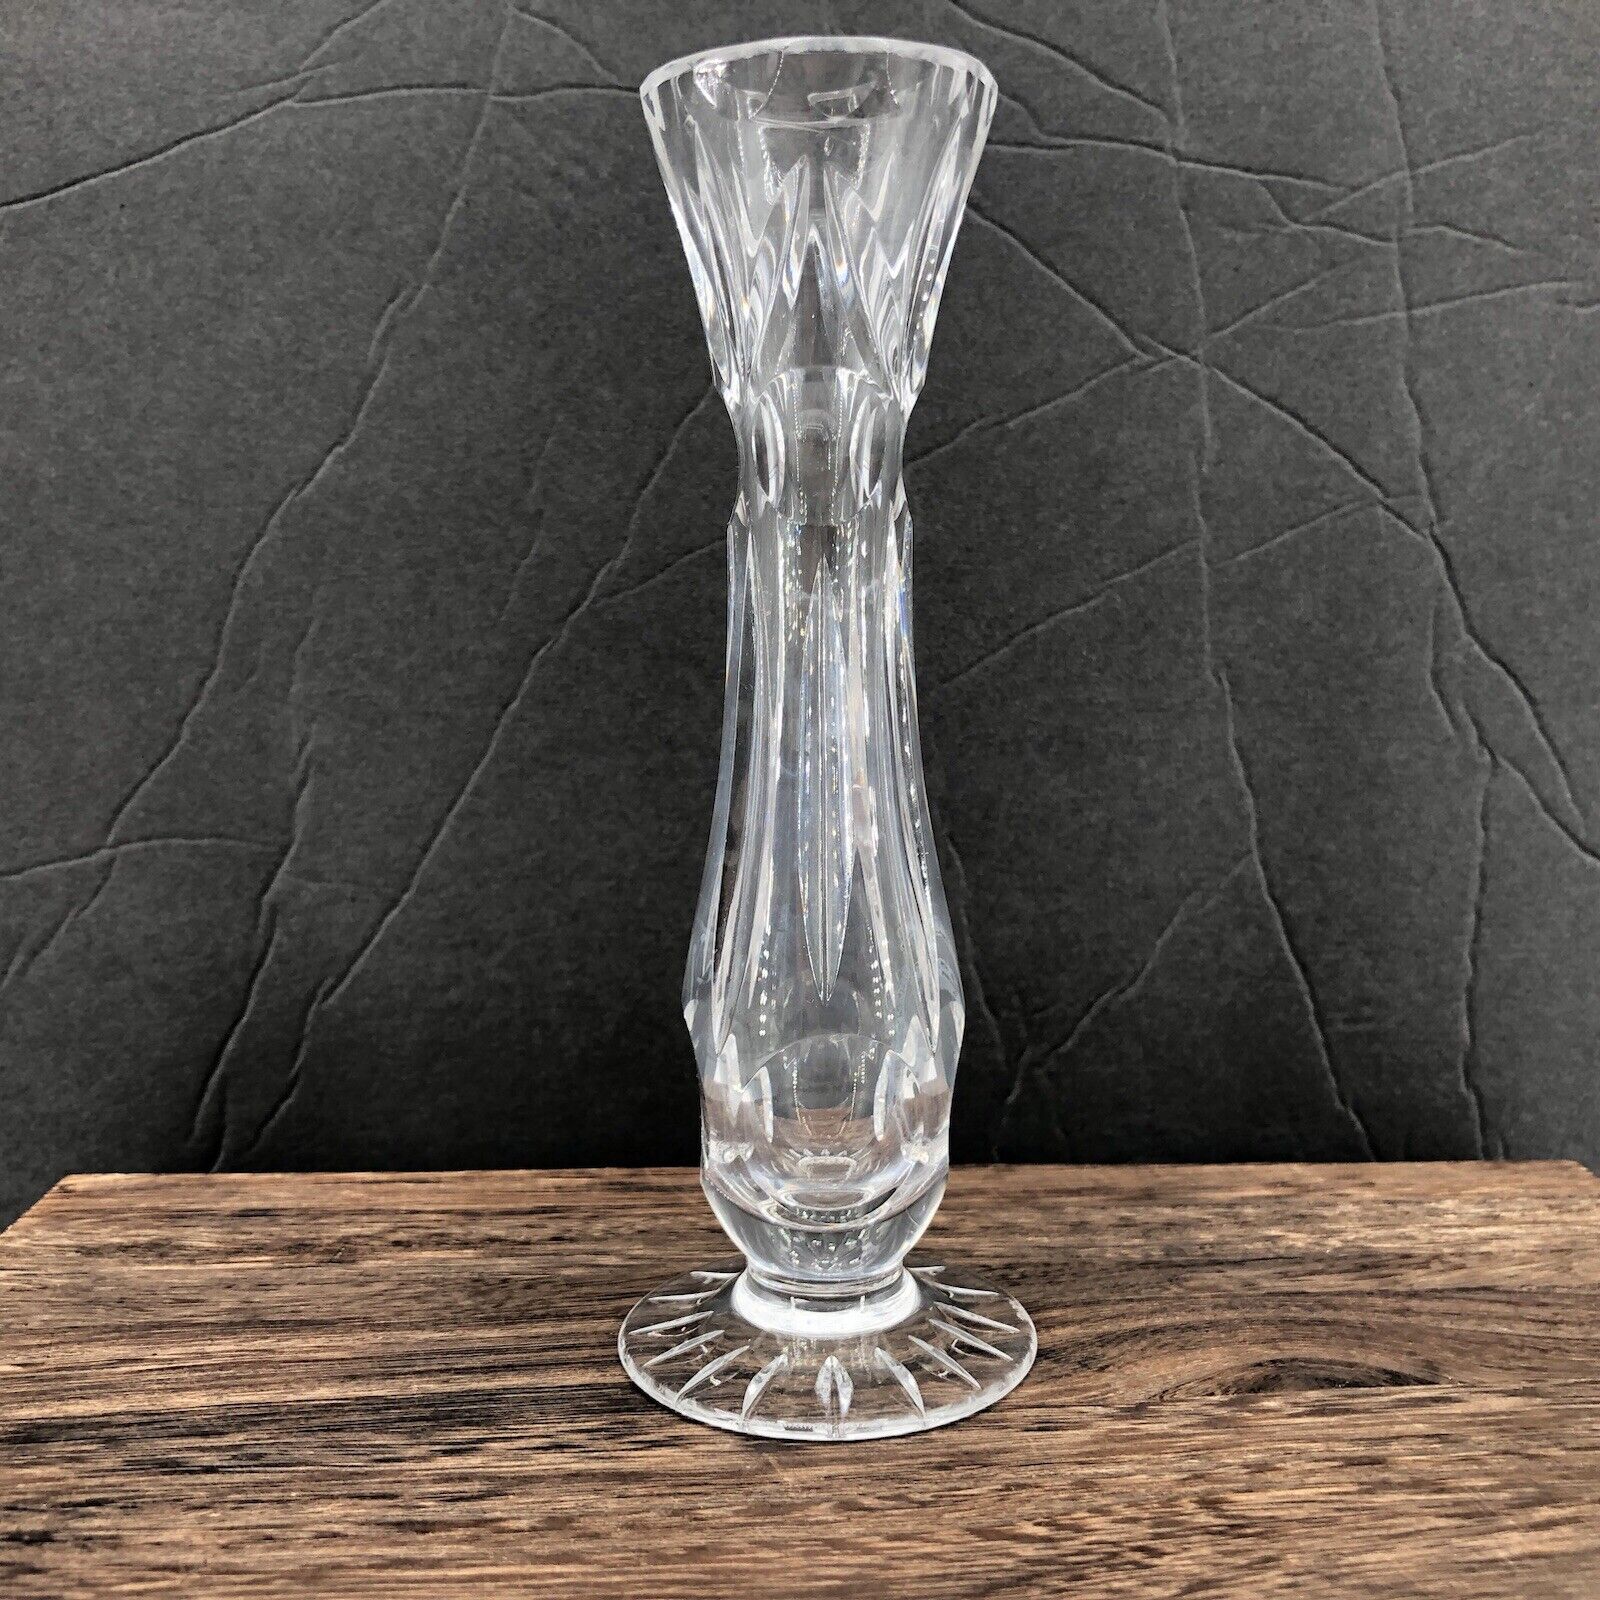 Vintage Gorham Crystal Bud Vase 6.5 Inches Tall Good Condition